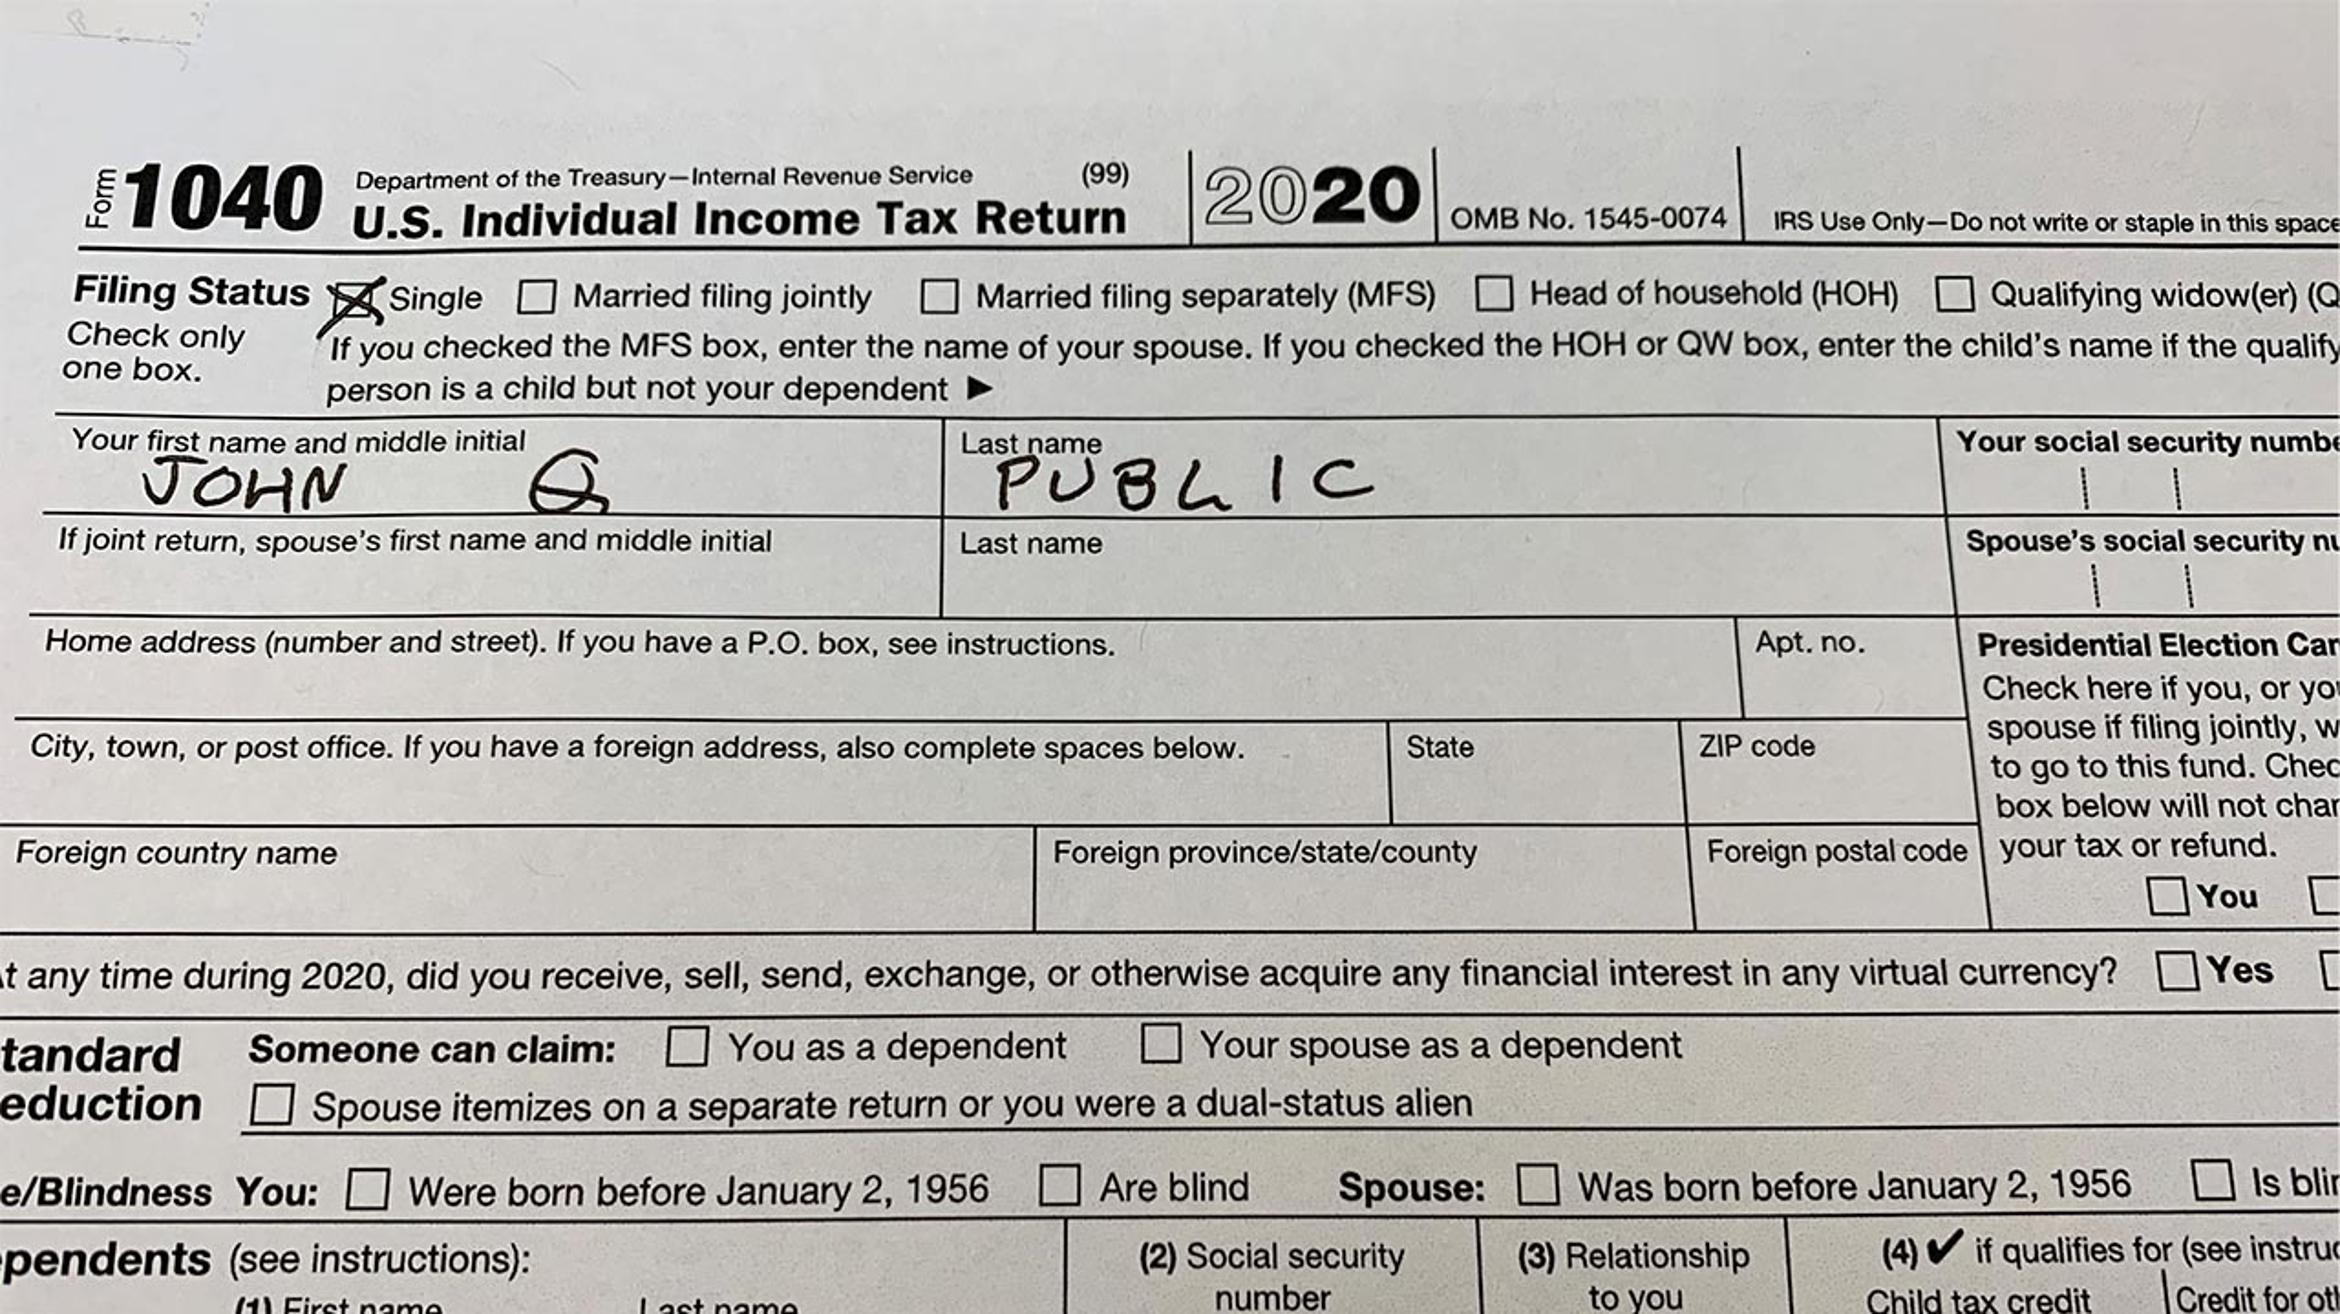 the-irs-begins-2020-income-tax-season-while-dealing-with-lingering